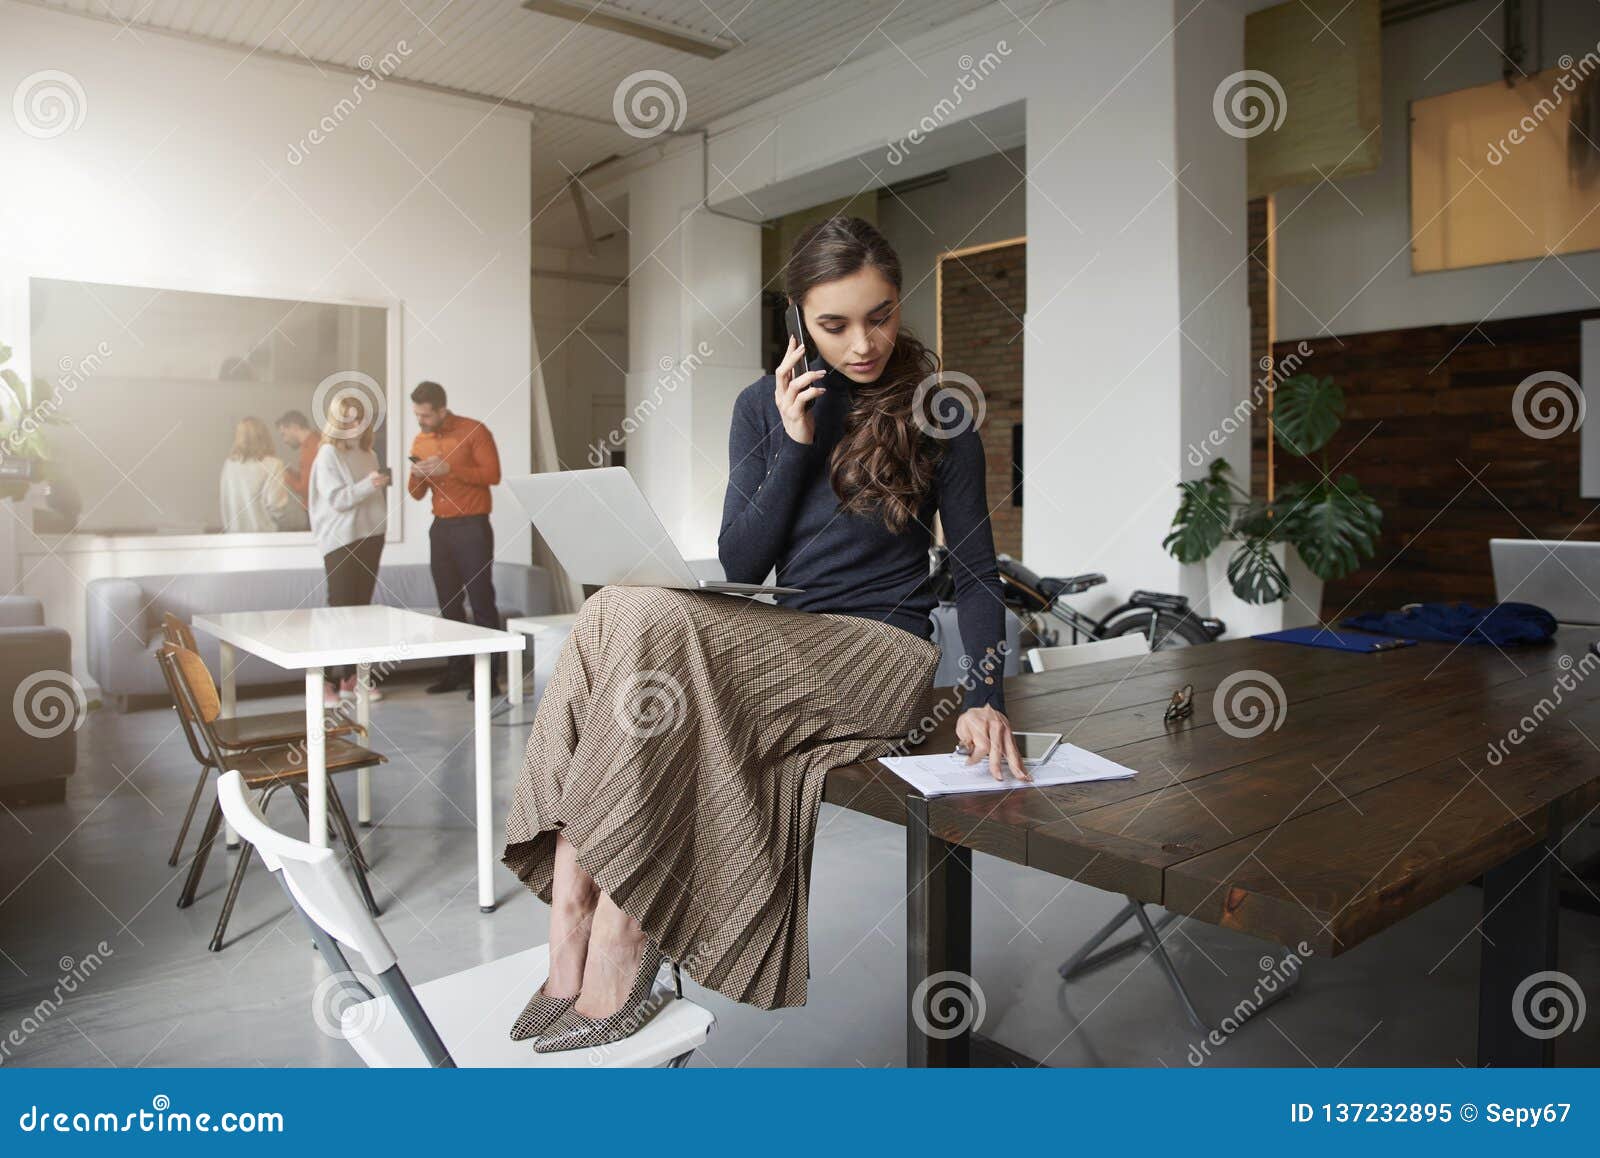 Young Businesswoman Making a Call while Sitting on Office Desk and ...